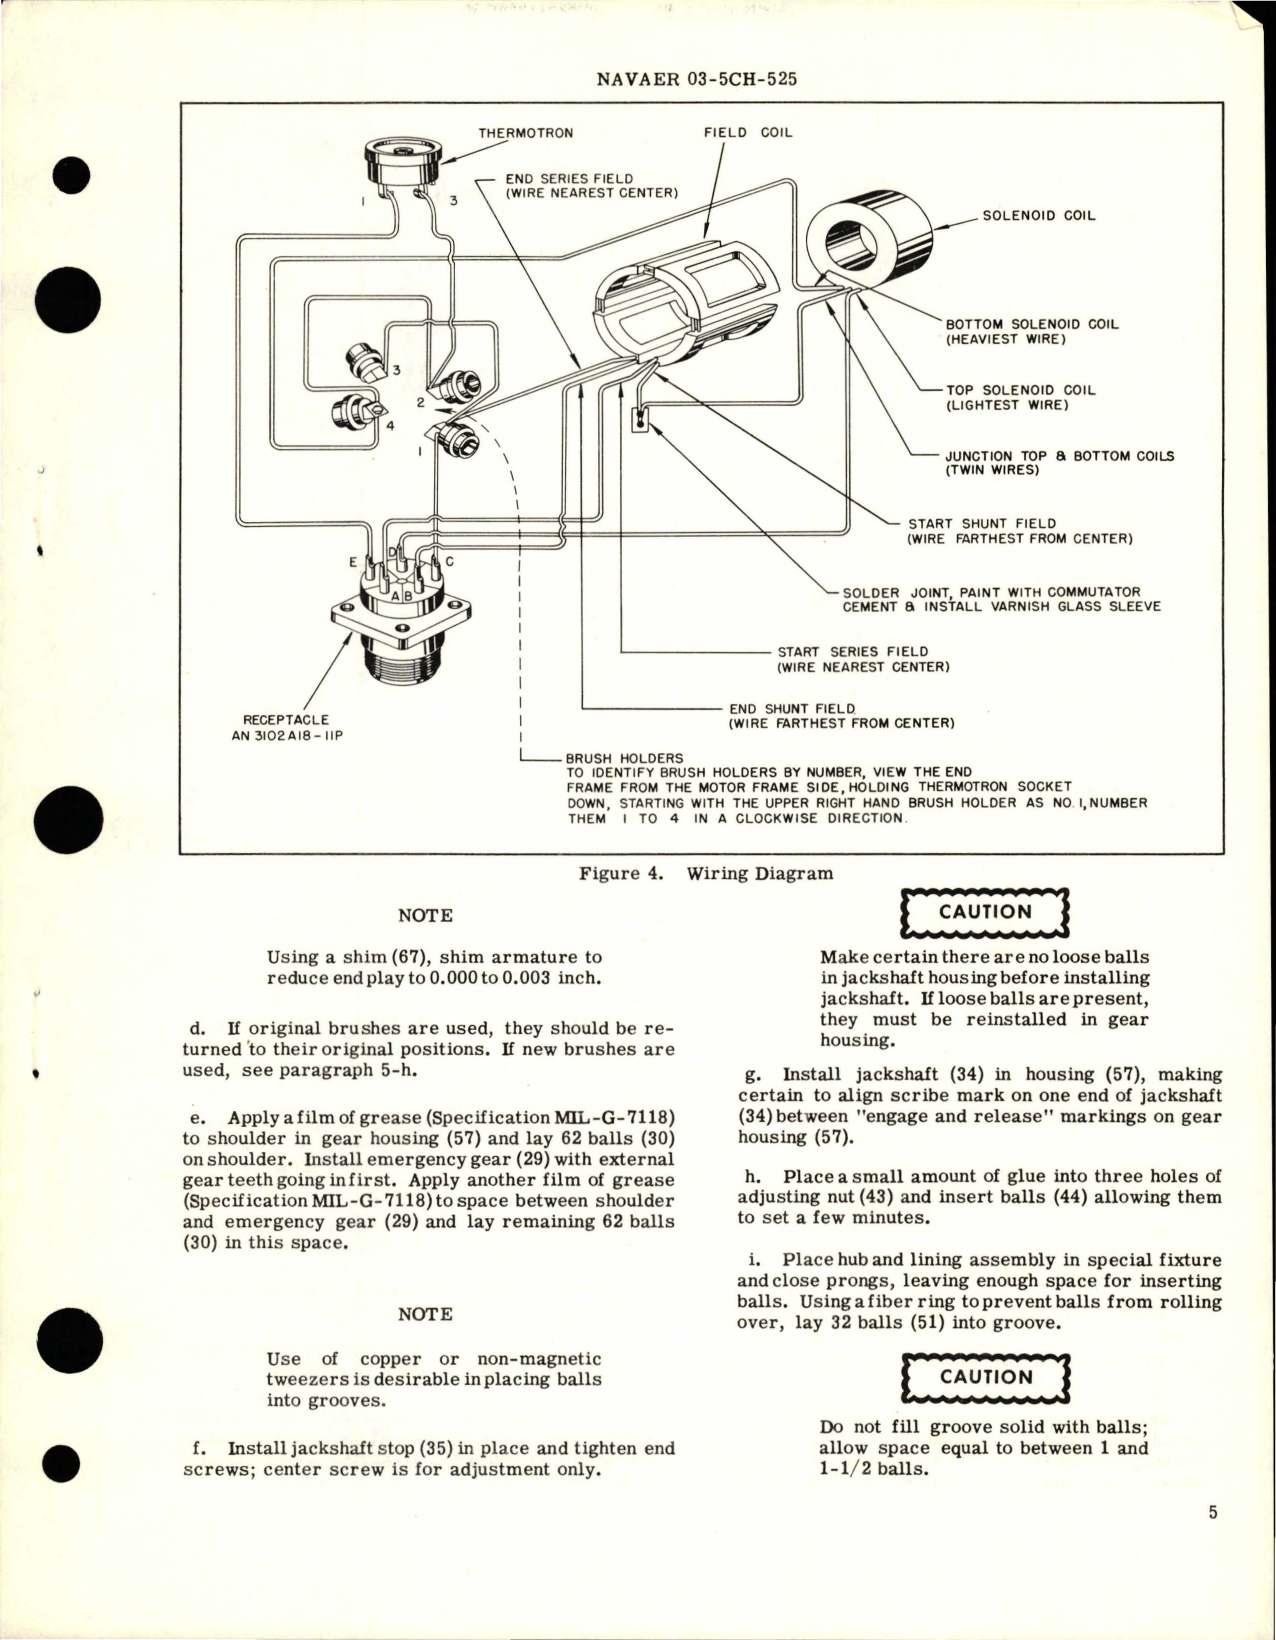 Sample page 5 from AirCorps Library document: Overhaul Instructions with Parts Breakdown for Actuator - Model A7618-4